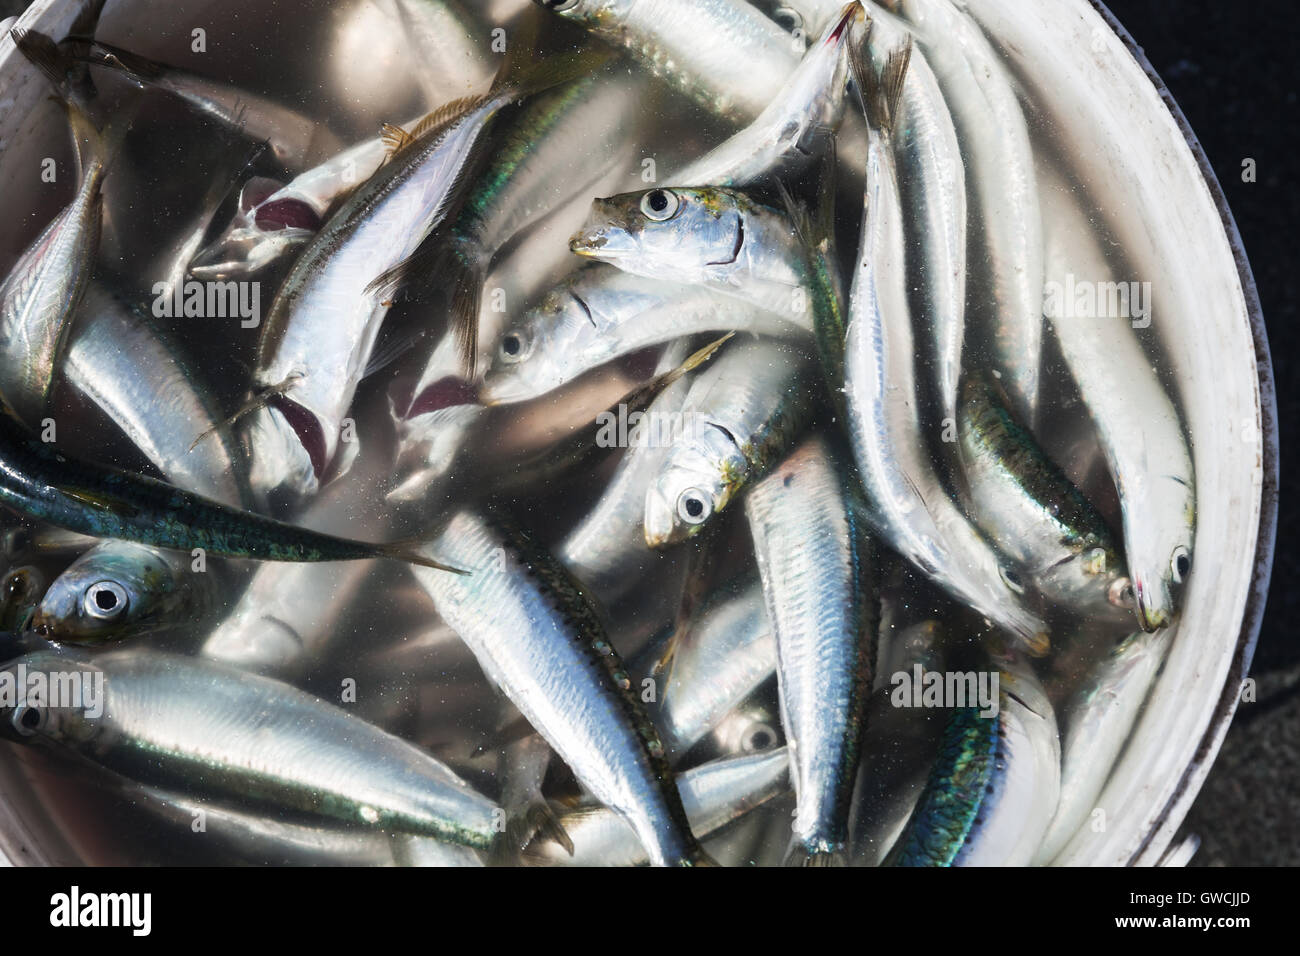 Сatch of small fish in a bucket Stock Photo